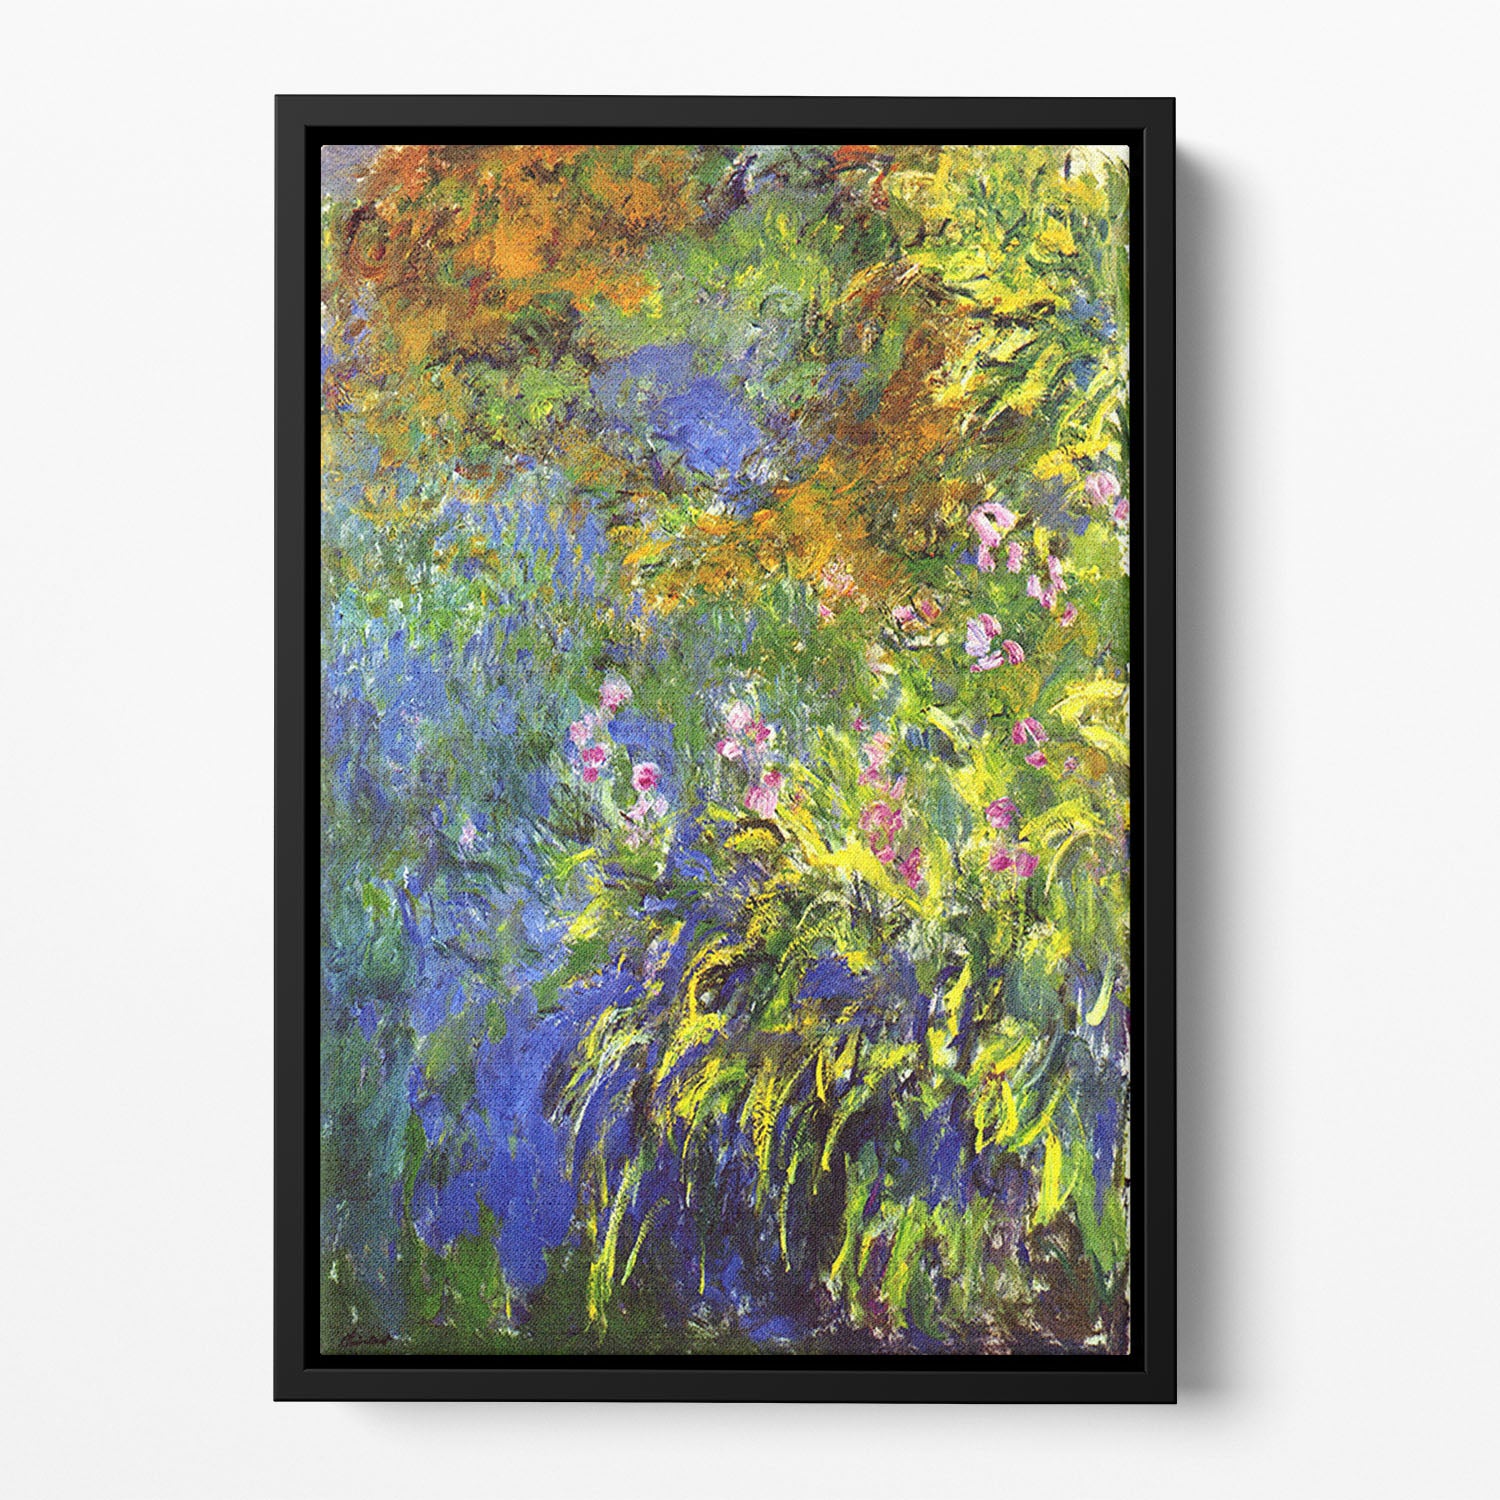 Iris at the sea rose pond 2 by Monet Floating Framed Canvas